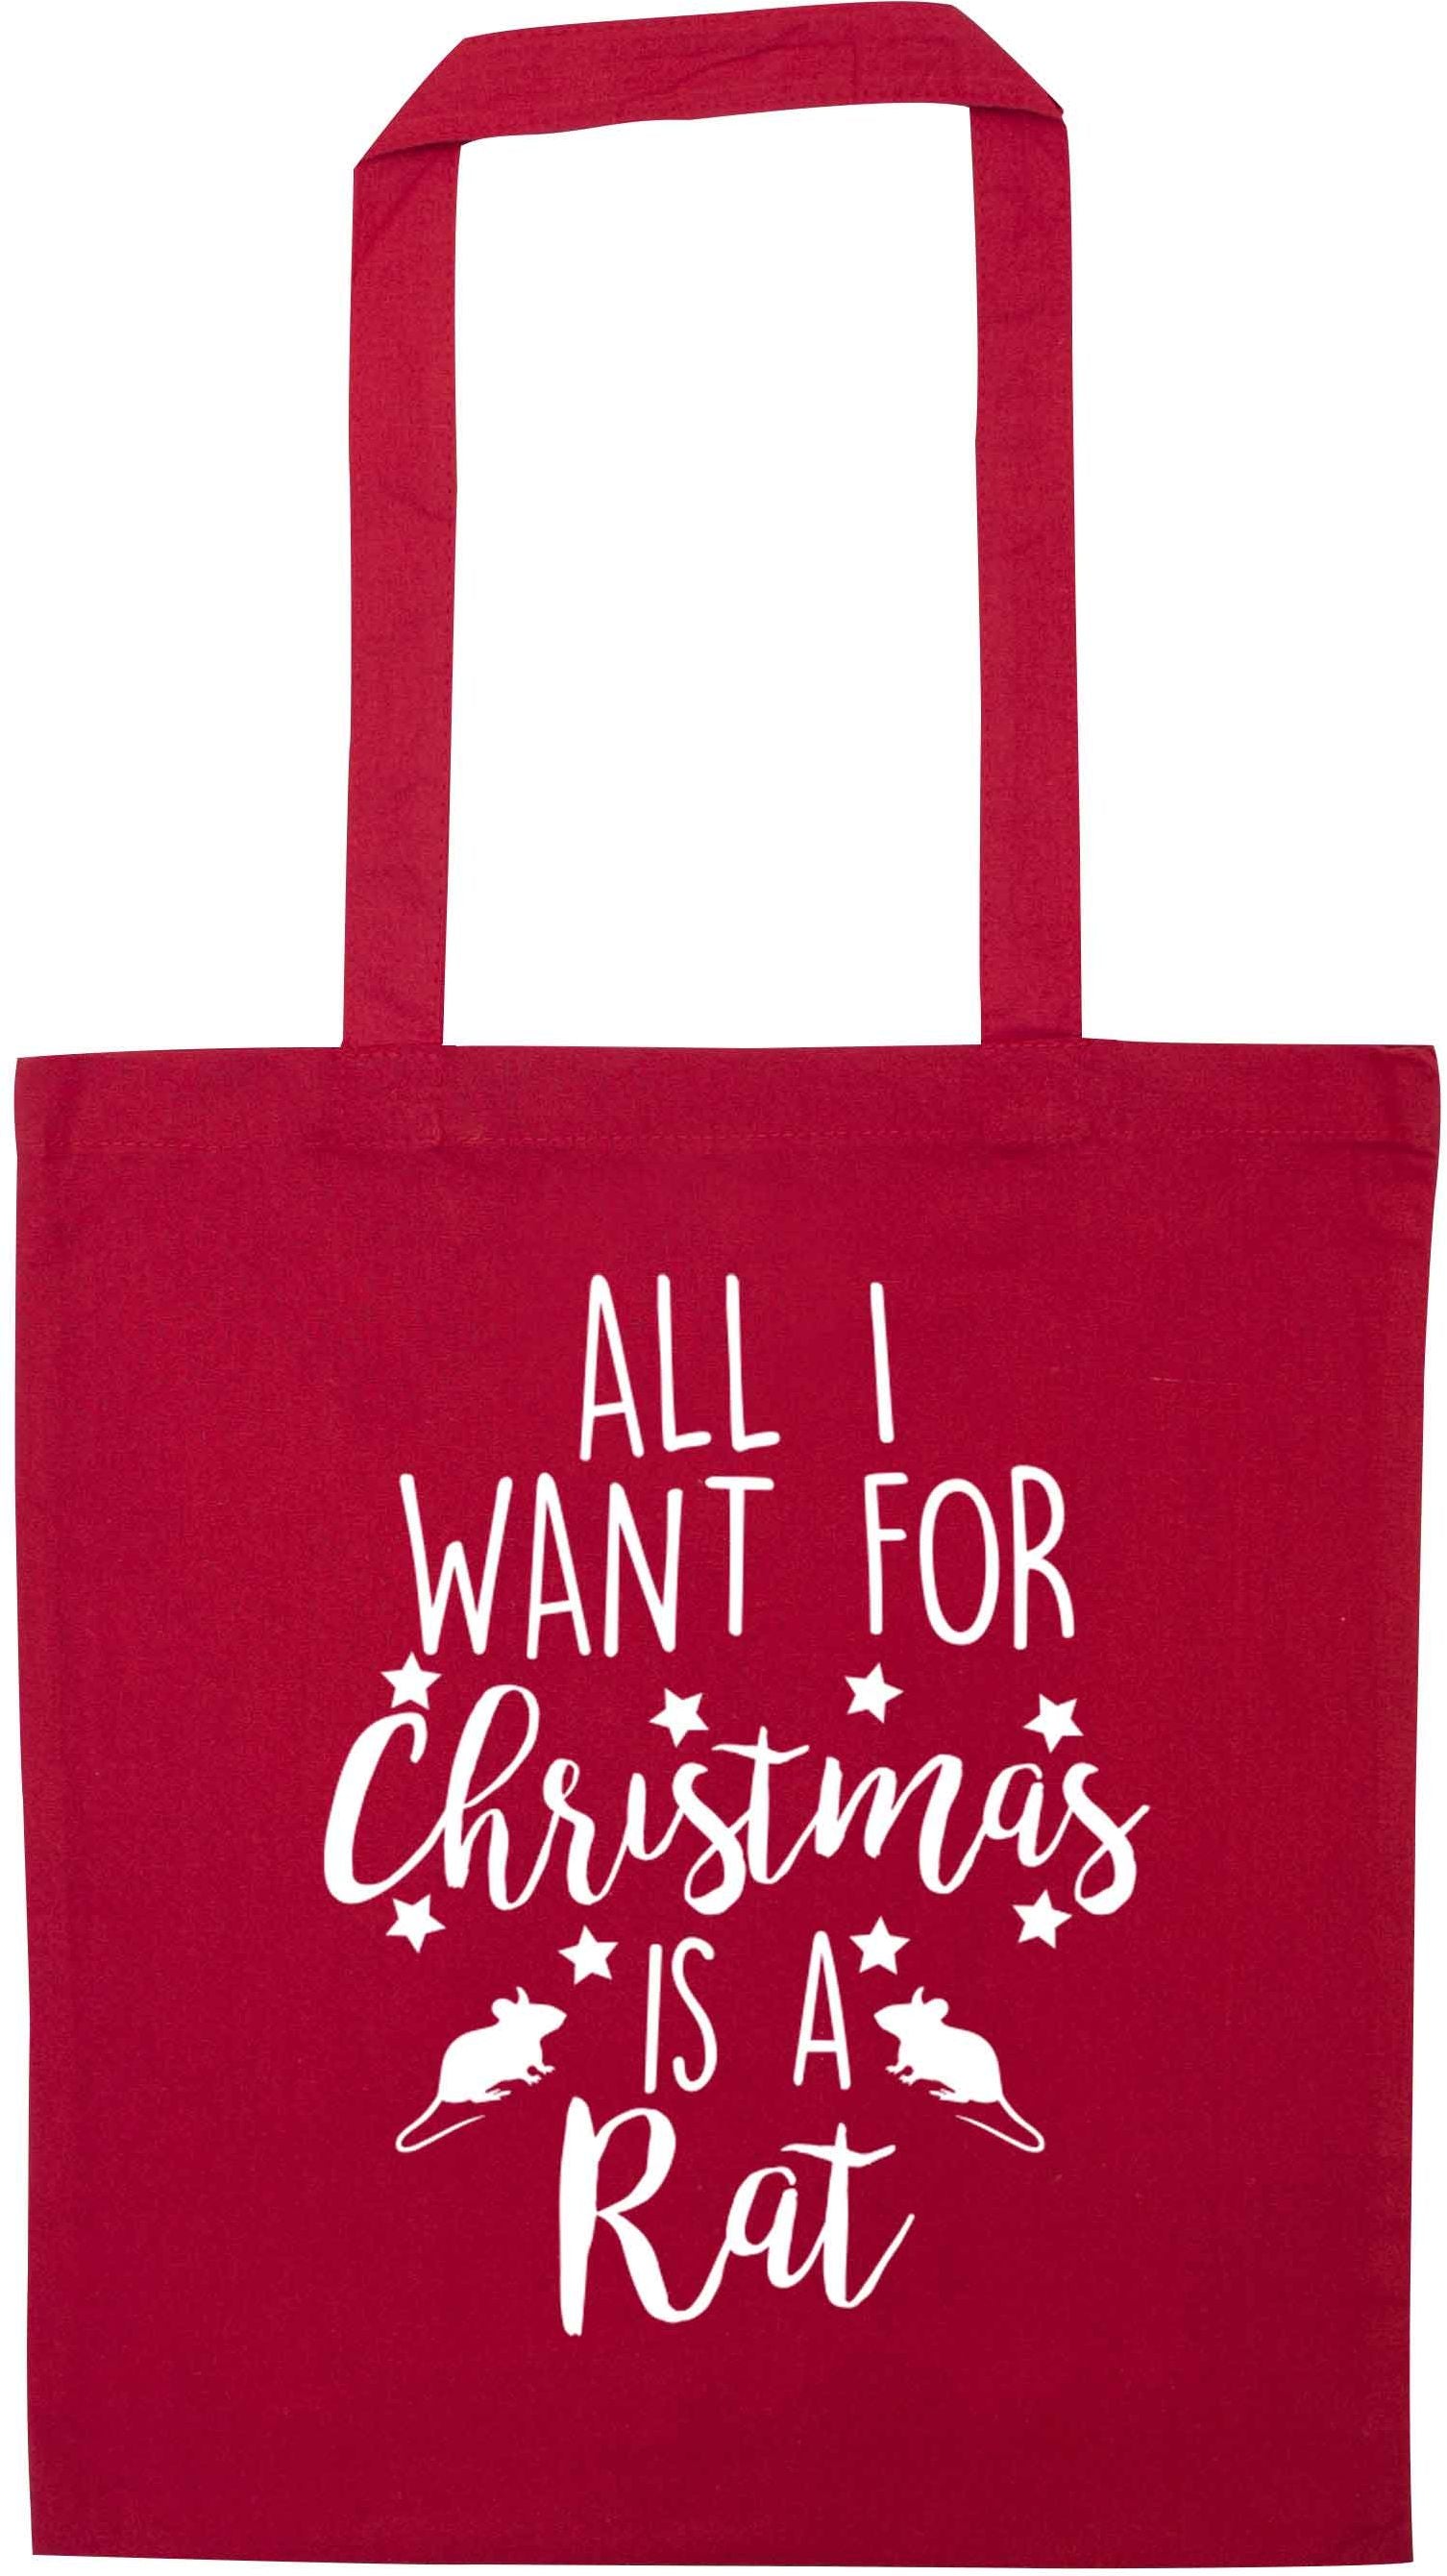 All I want for Christmas is a rat red tote bag